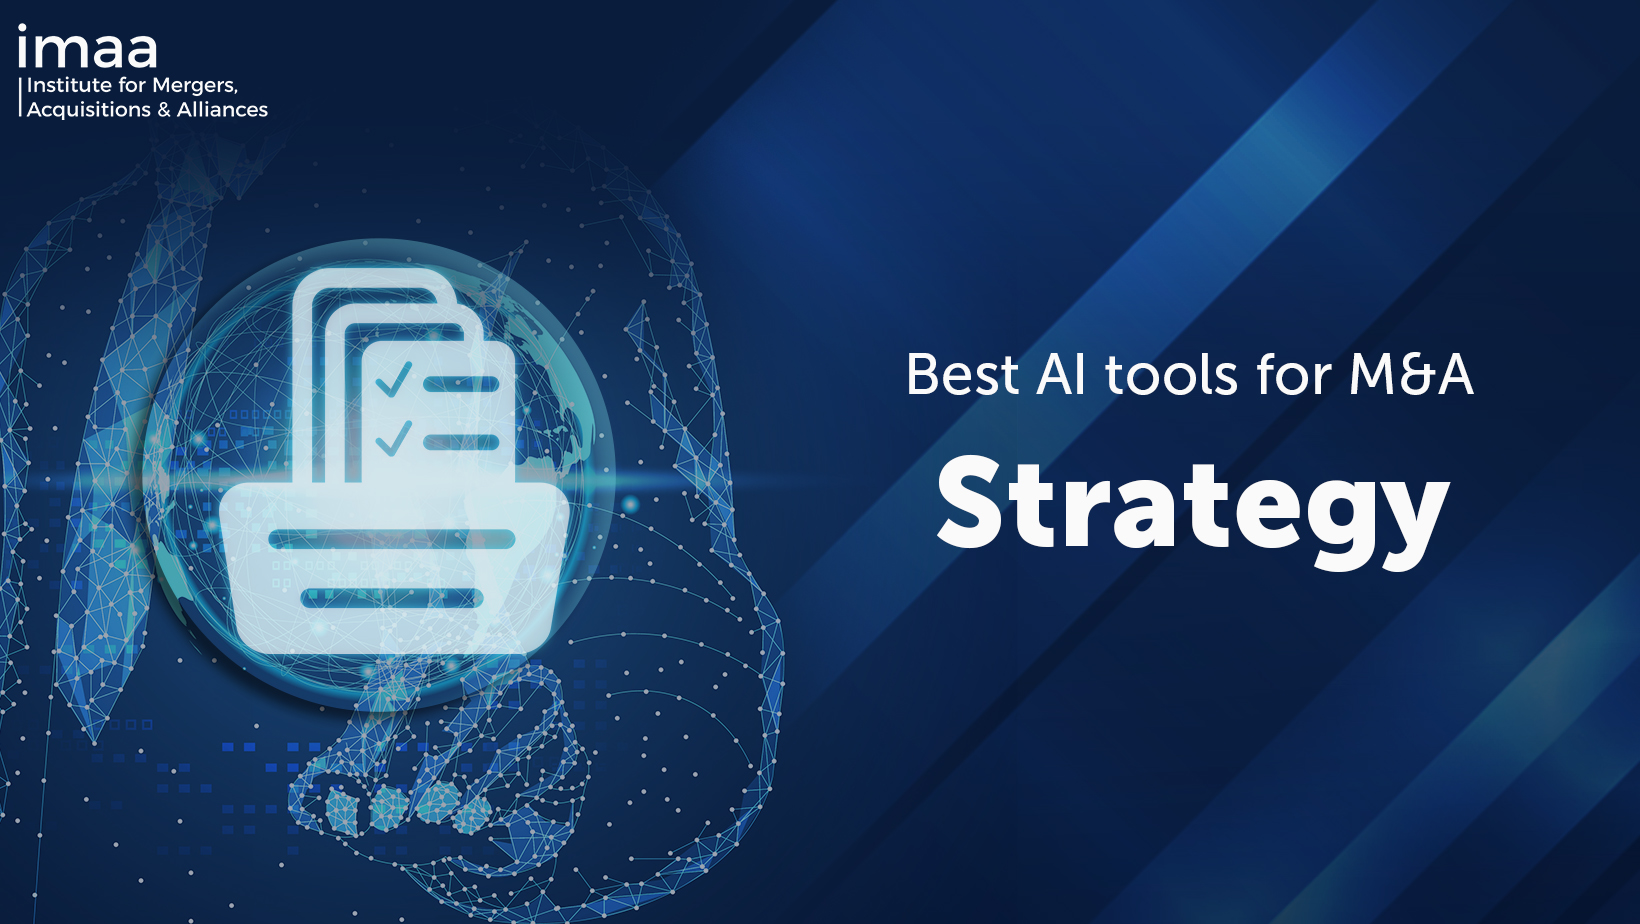 Best AI Tools for M&A Strategy